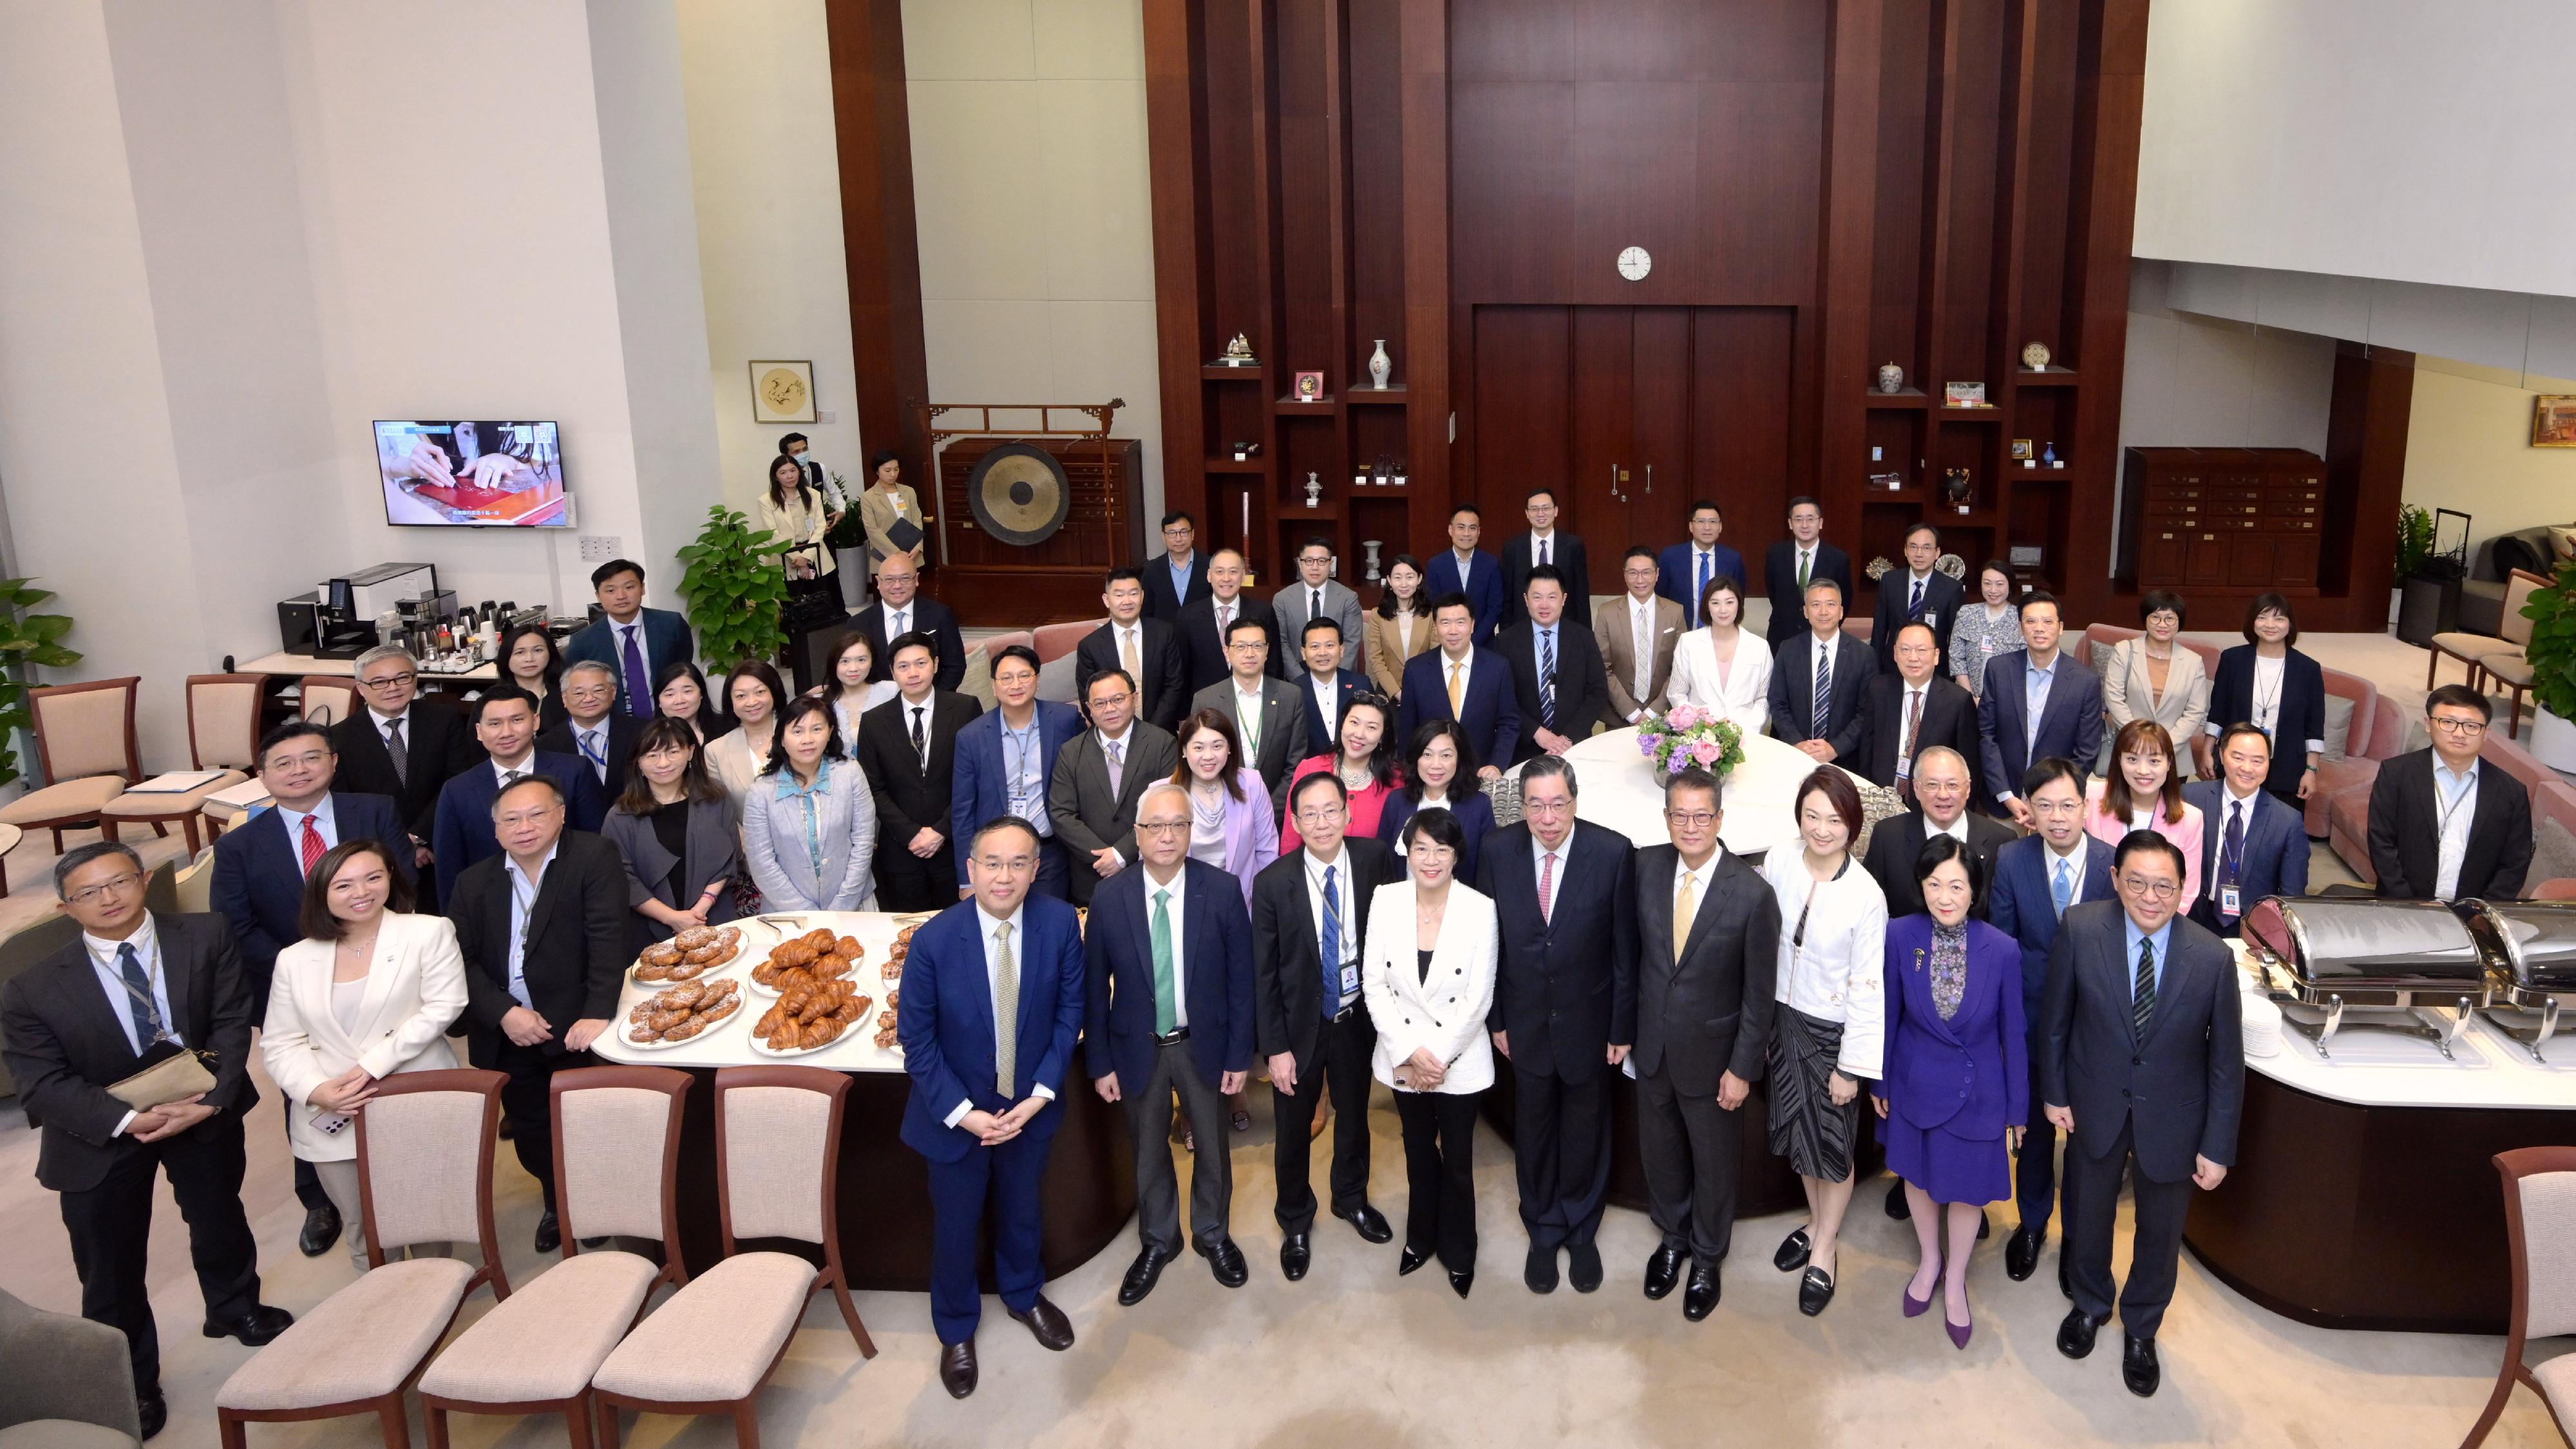 The Financial Secretary, Mr Paul Chan, attended the Ante Chamber exchange session at the Legislative Council (LegCo) today (May 22). Photo shows Mr Chan (first row, fourth right); the President of the LegCo, Mr Andrew Leung (first row, fifth right); the Secretary for Financial Services and the Treasury, Mr Christopher Hui (first row, first left); the Secretary for Environment and Ecology, Mr Tse Chin-wan (first row, second left); the Acting Secretary for Commerce and Economic Development, Dr Bernard Chan (fourth row, third right), and the Acting Secretary for Innovation, Technology and Industry, Ms Lillian Cheong (third row, third right), with LegCo Members before the meeting.